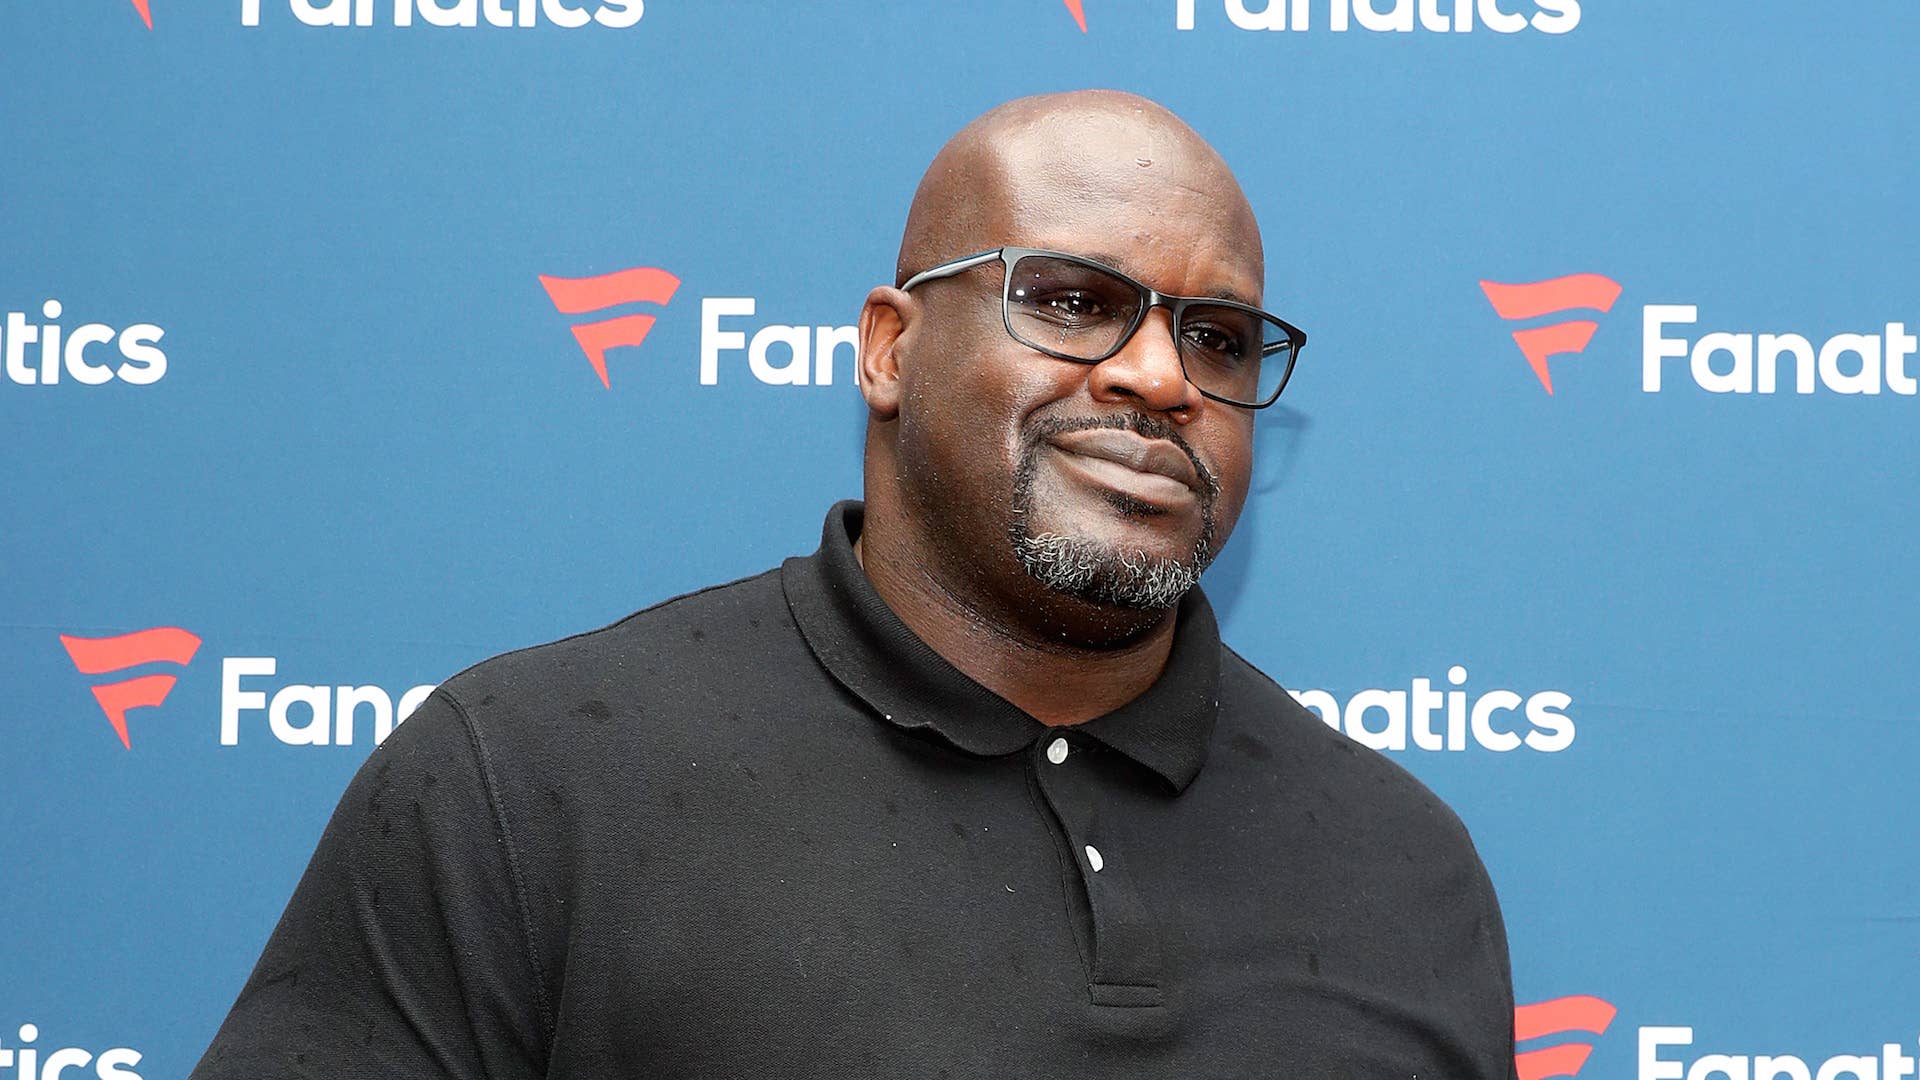 Shaquille O'Neal attends Michael Rubin's Fanatics Super Bowl Party